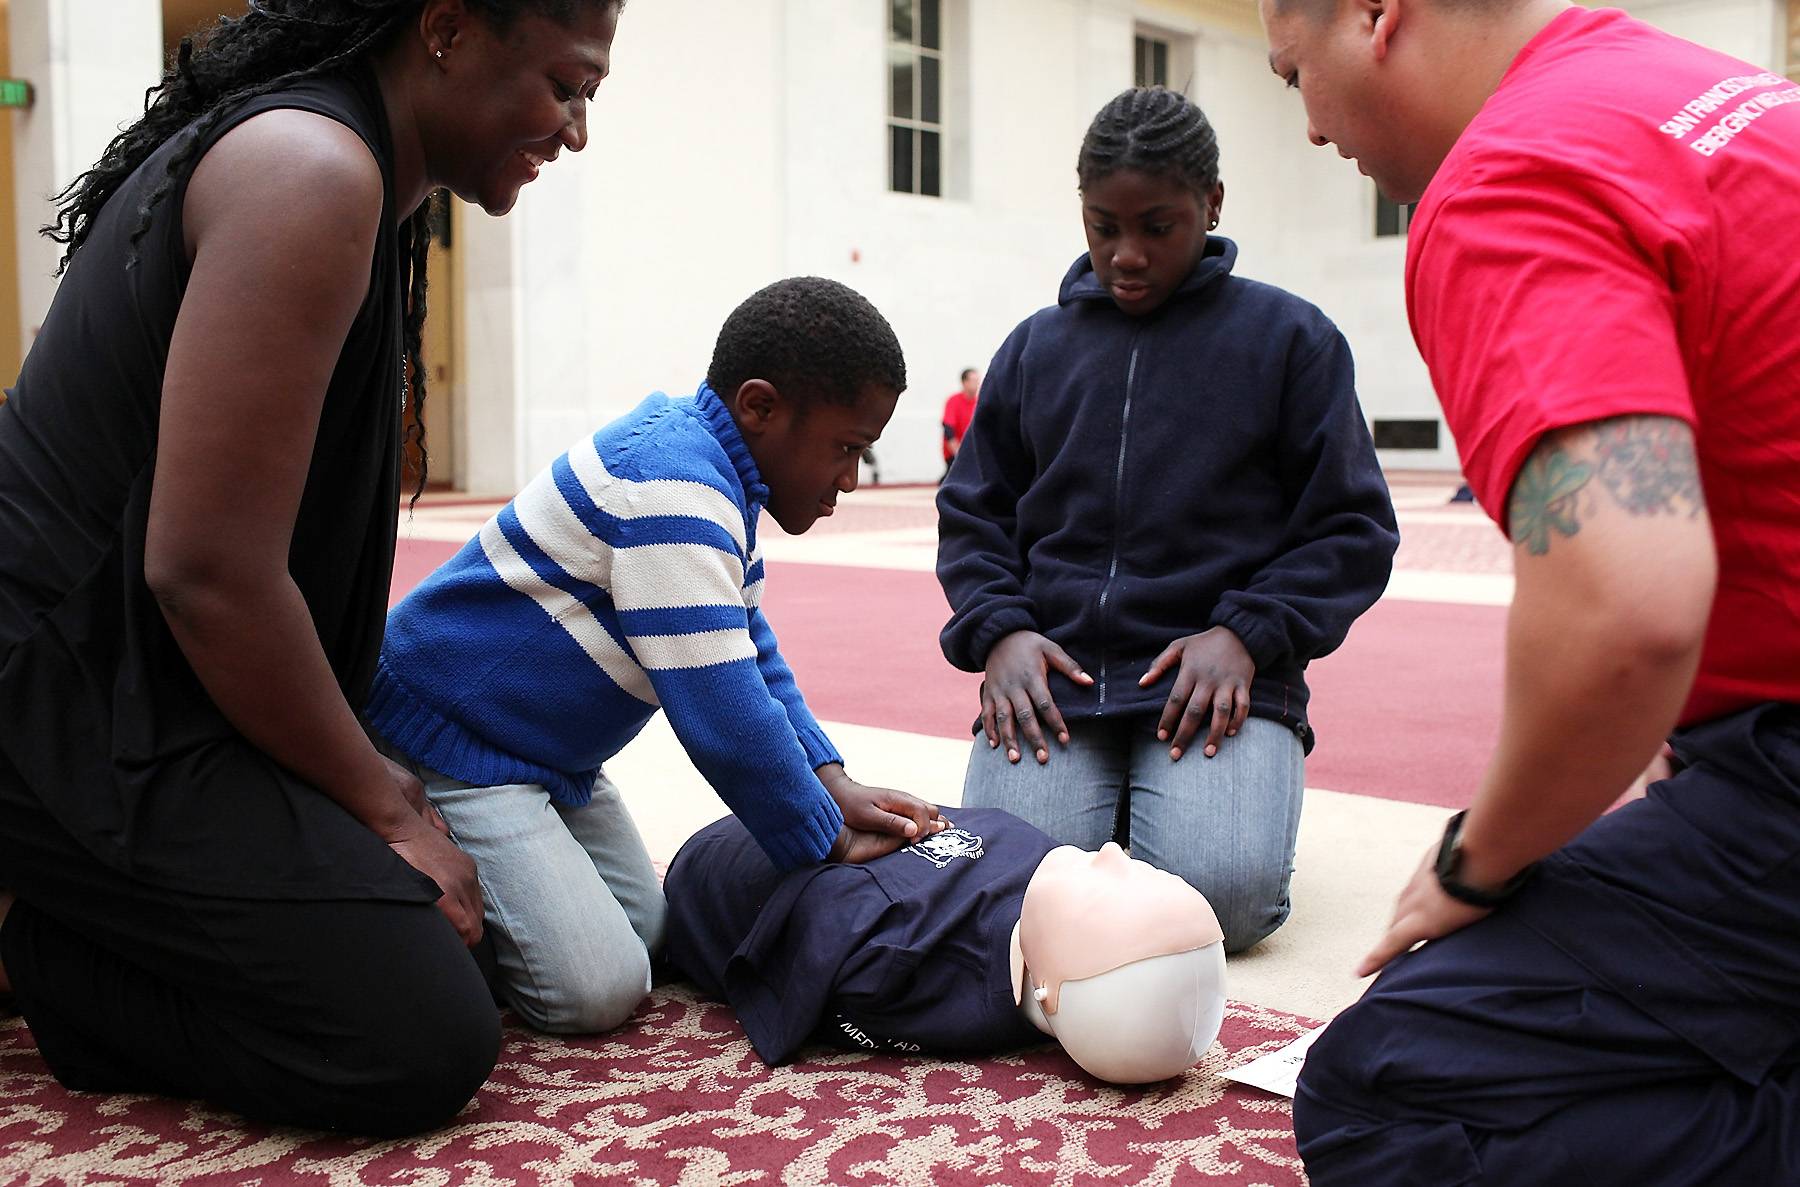 Why CPR Trainings Have Low Turnout in the Poor South